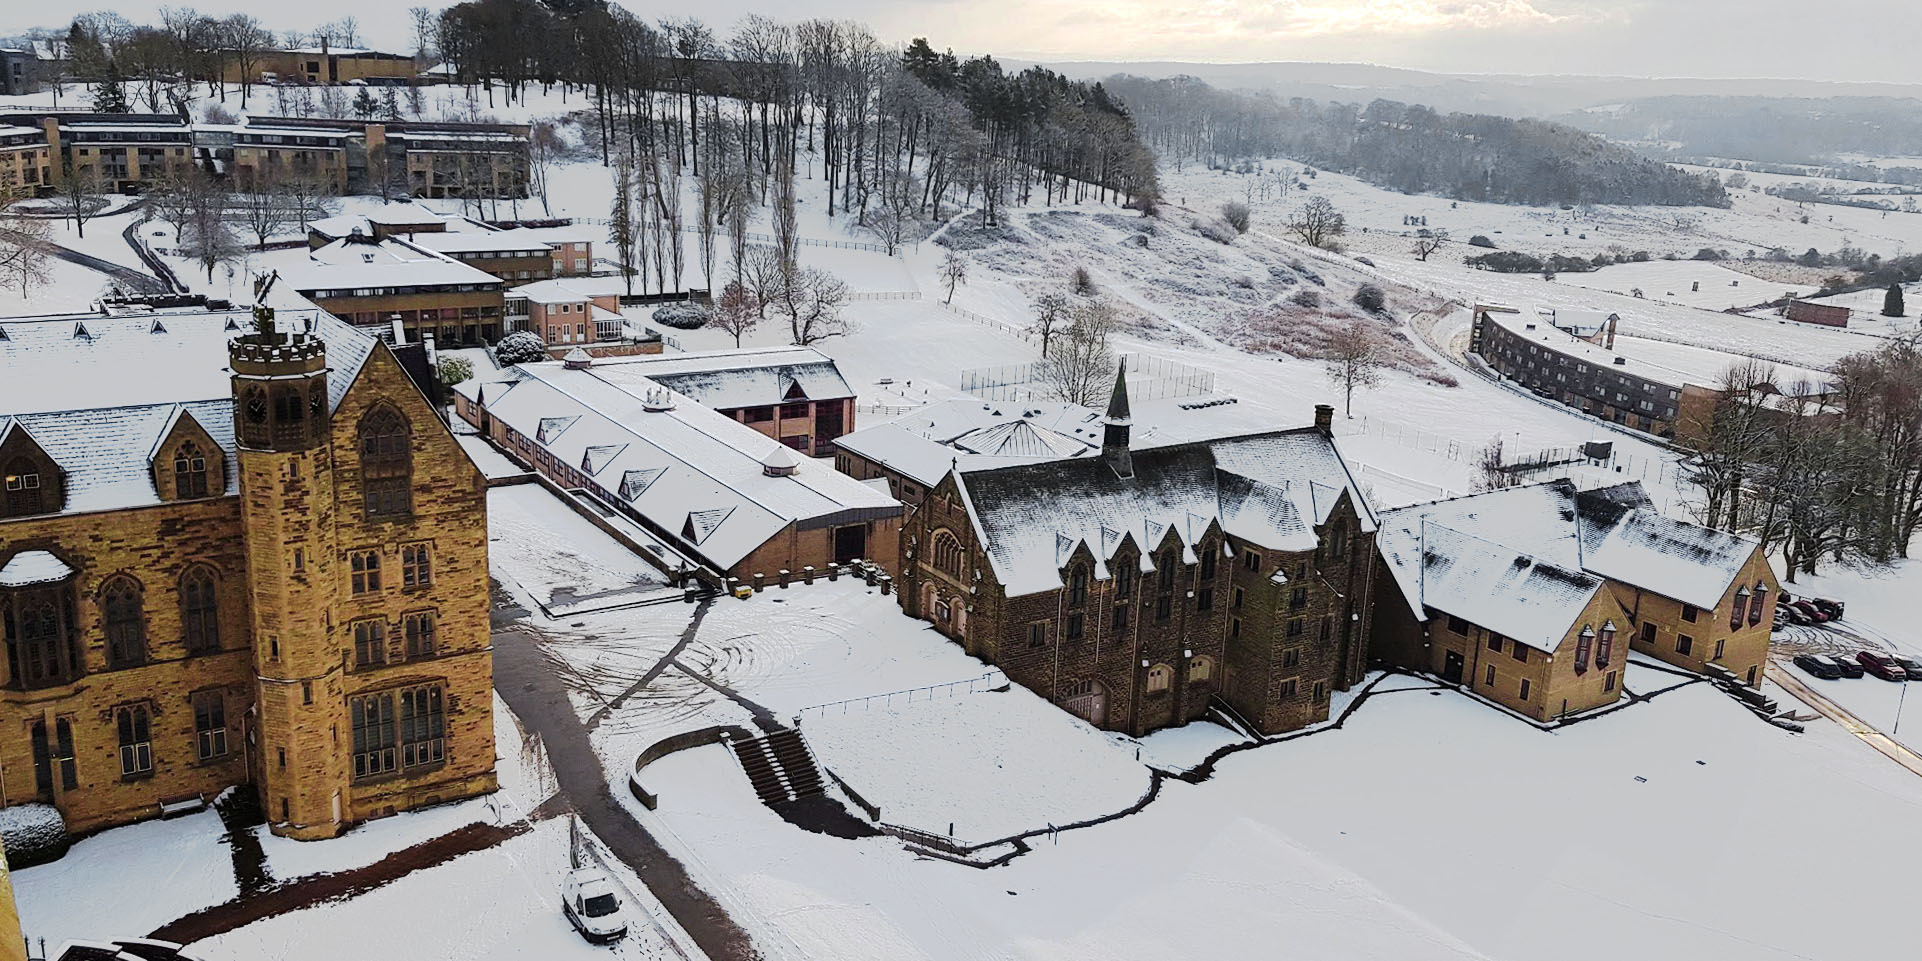 Ampleforth in the snow